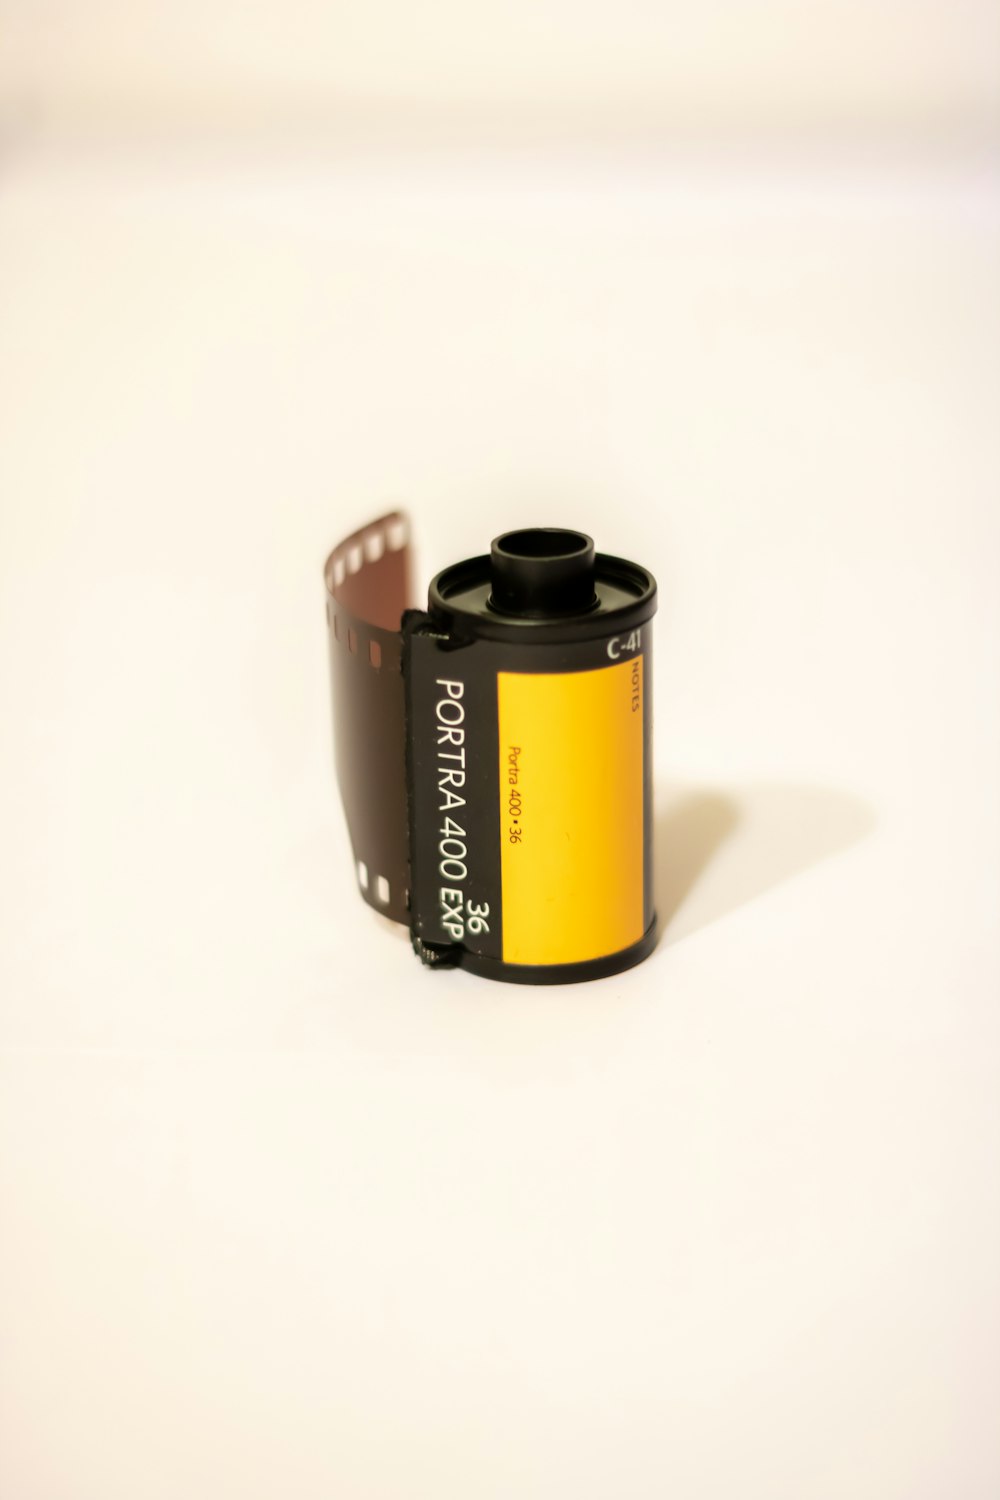 black and yellow labeled can